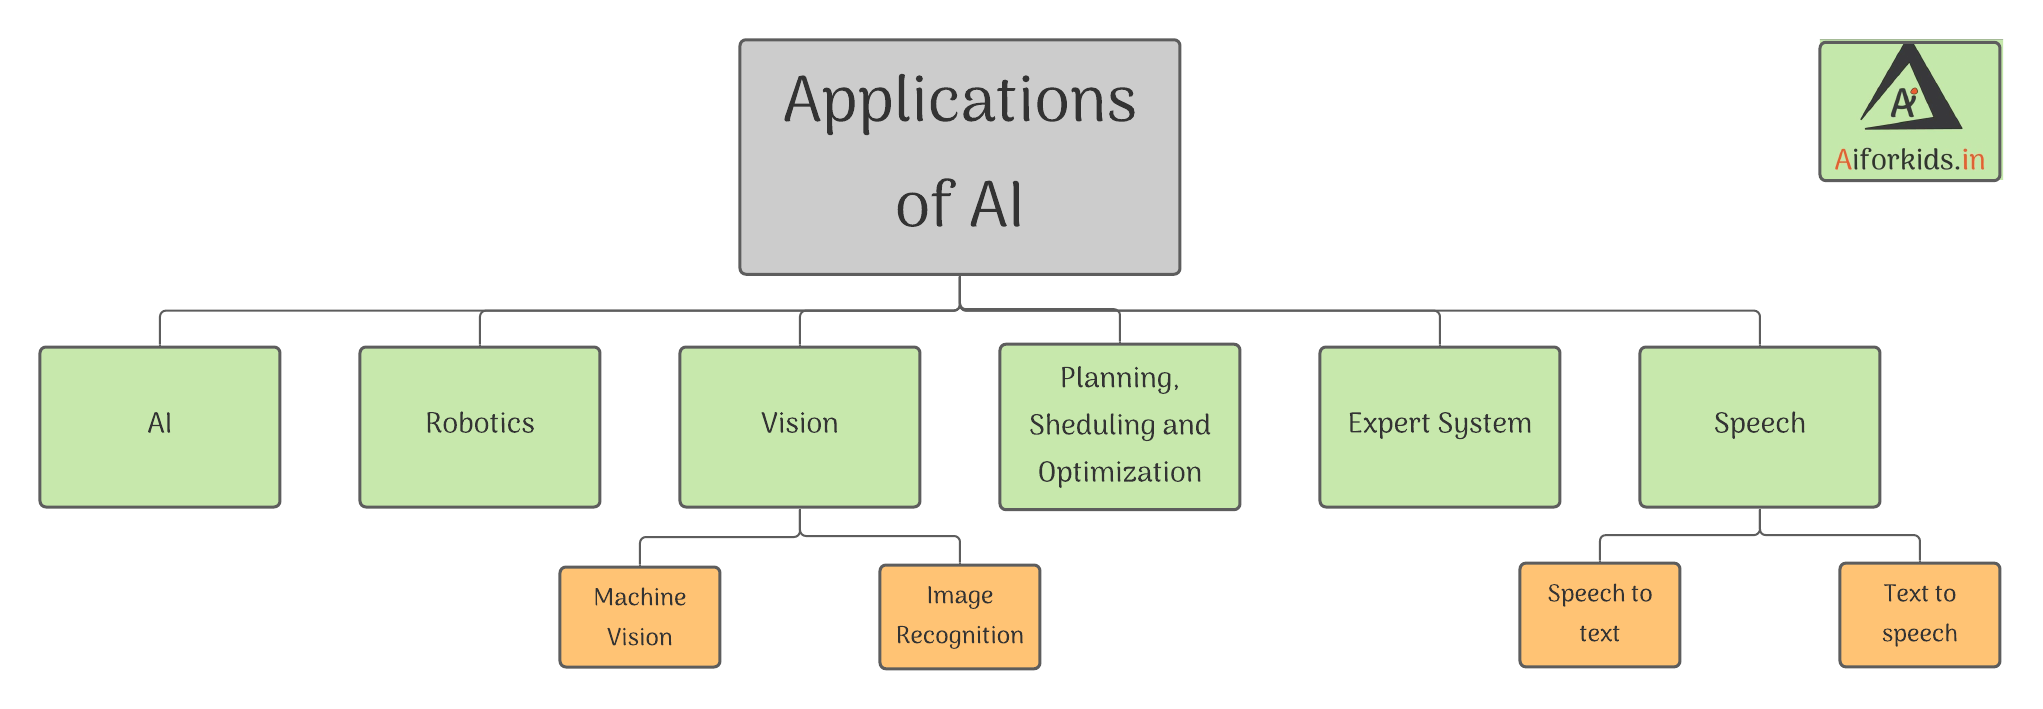 Applications-of-AI